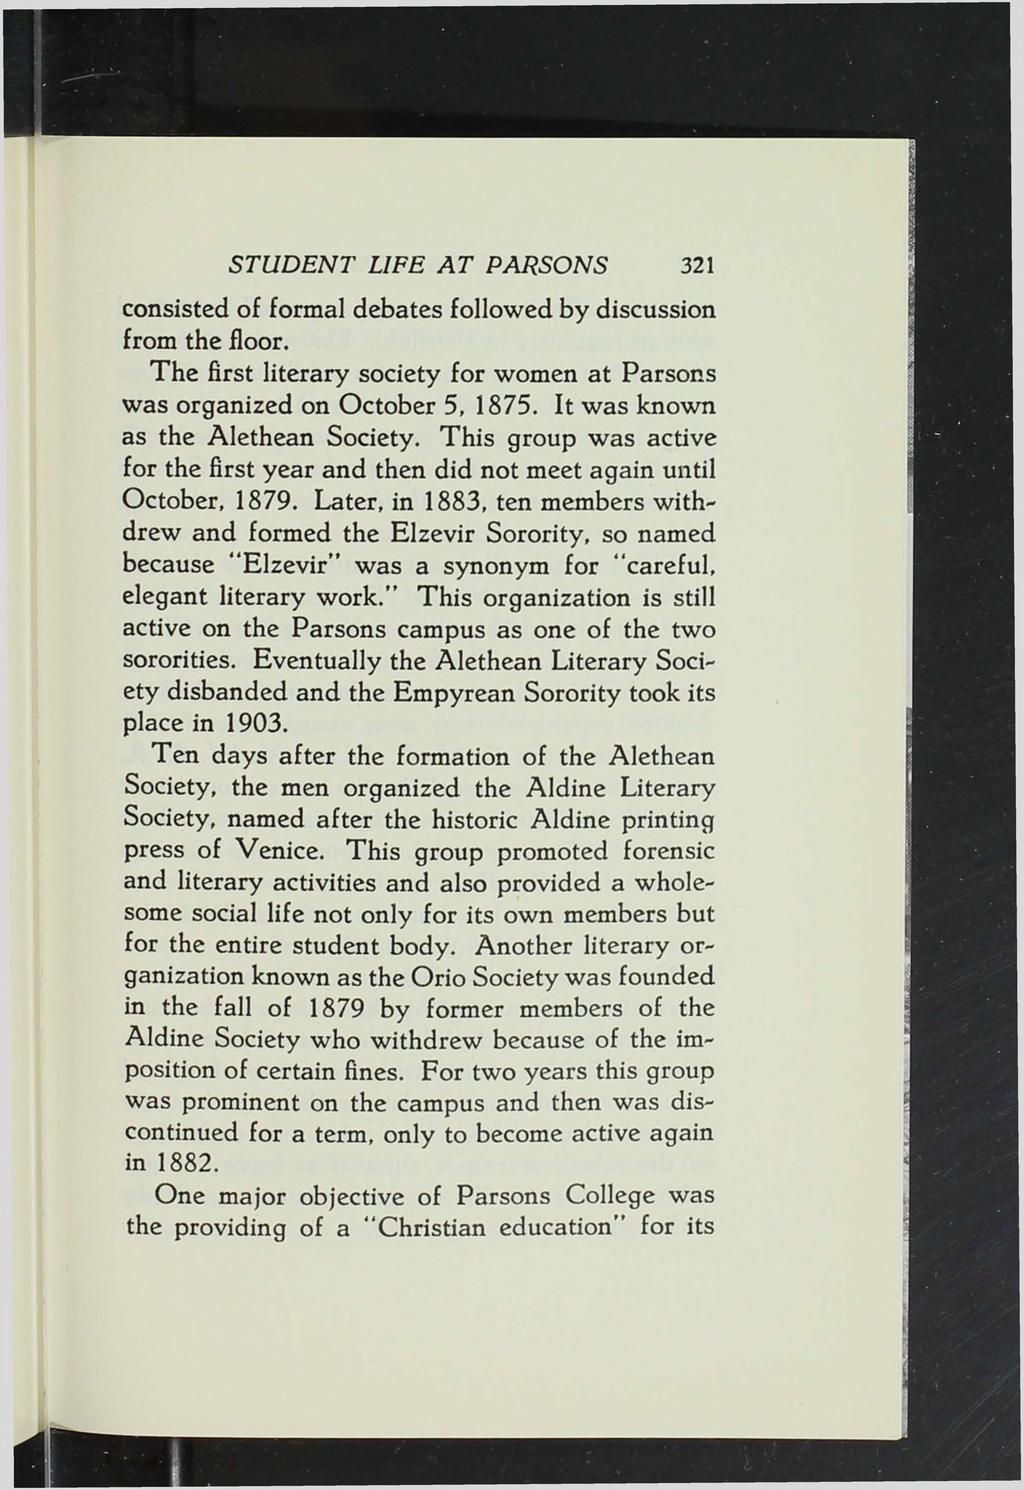 STUDENT LIFE A T PARSONS 321 consisted of formal debates followed by discussion from the floor. The first literary society for women at Parsons was organized on October 5, 1875.